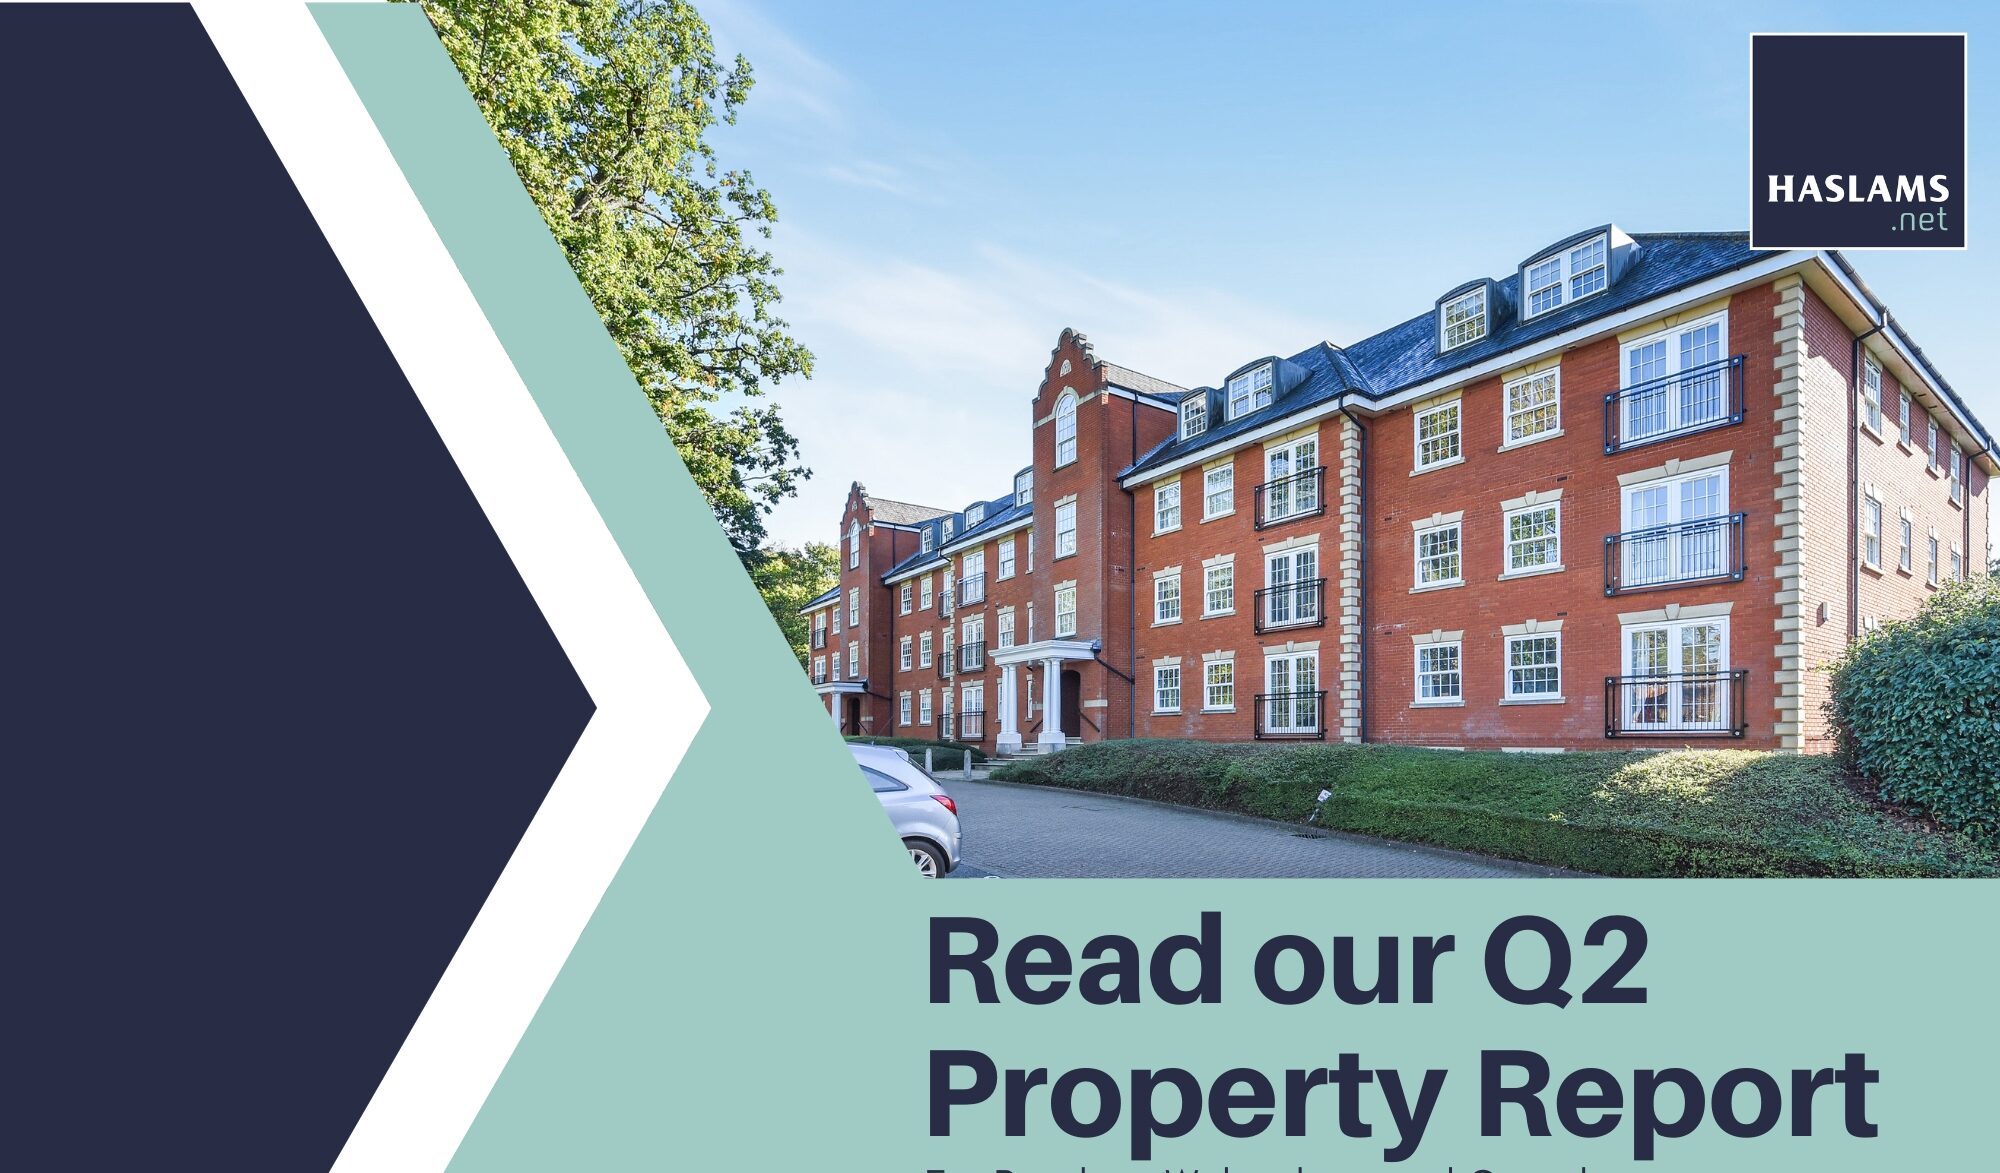 Q2 Property Report for Reading, Wokingham and Crowthorne Thumbnail